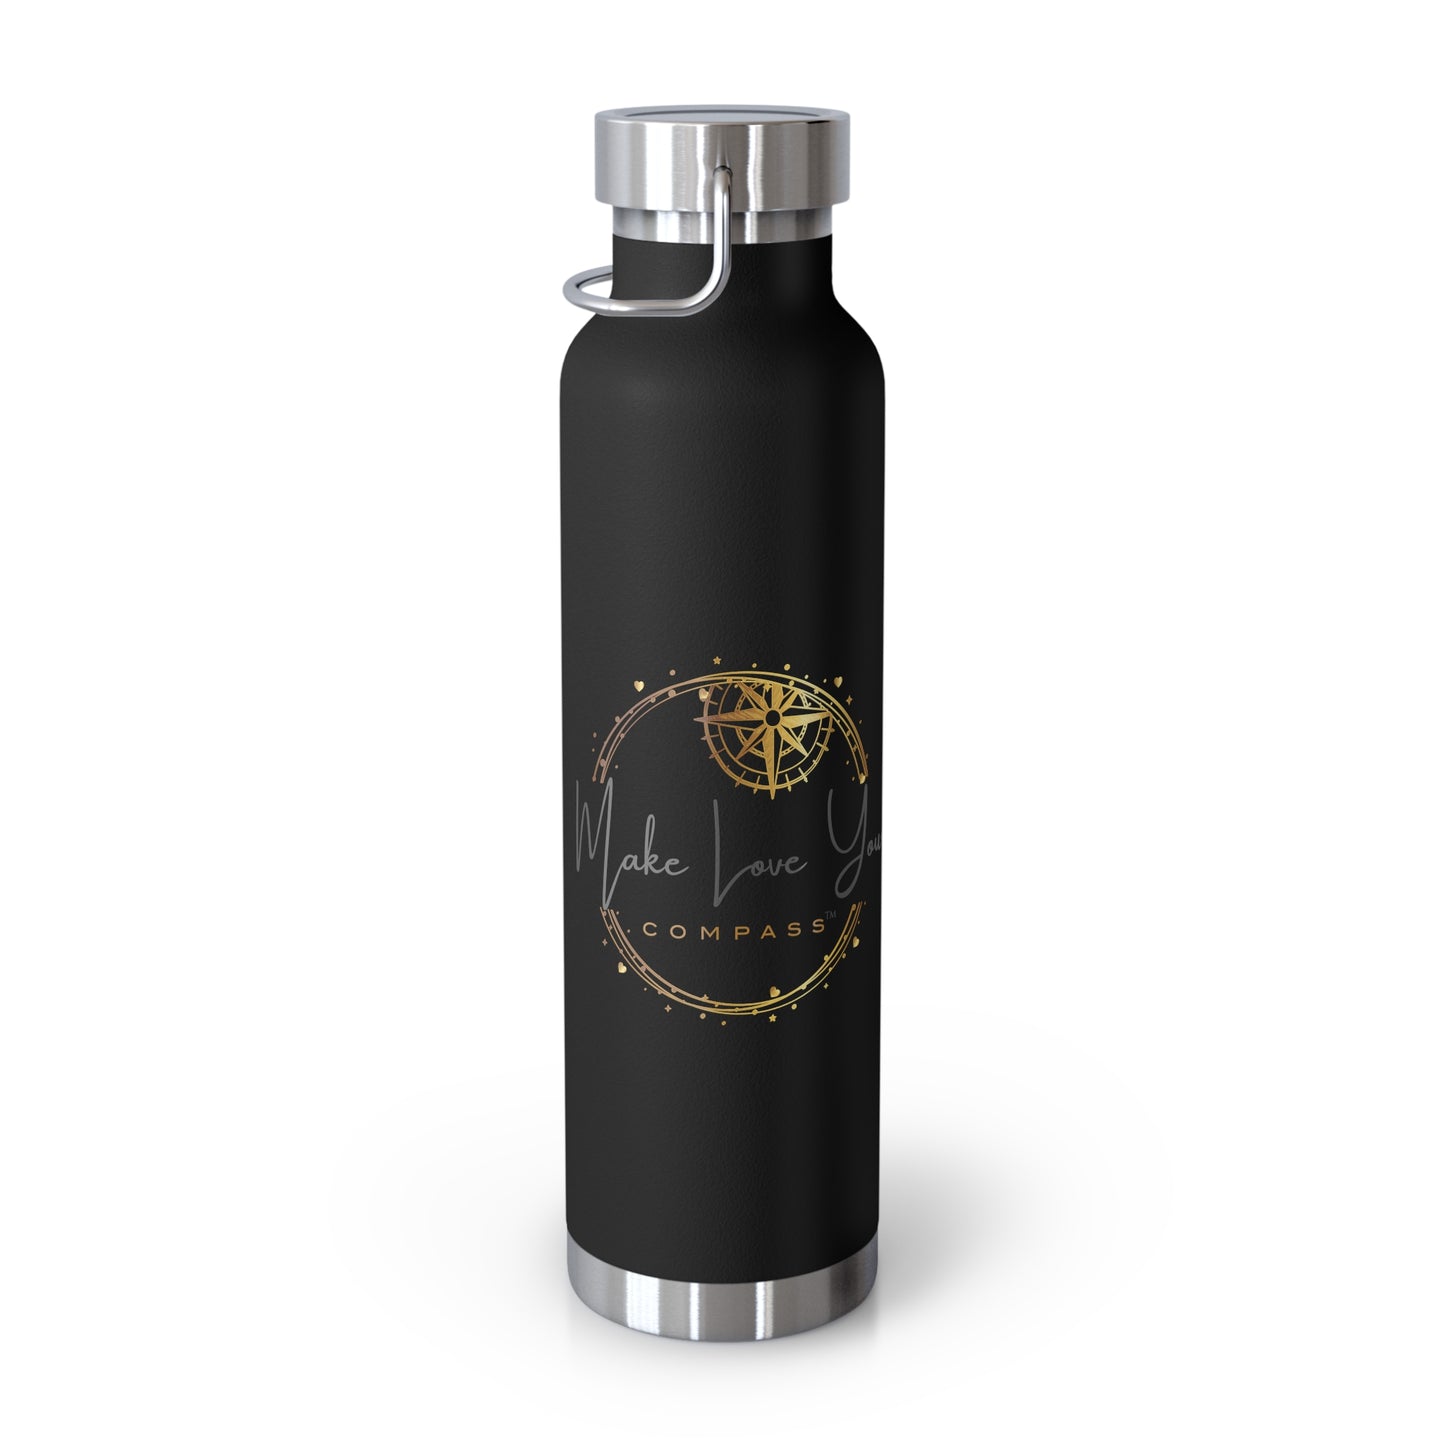 Copper Quench Insulated Bottle, 22oz